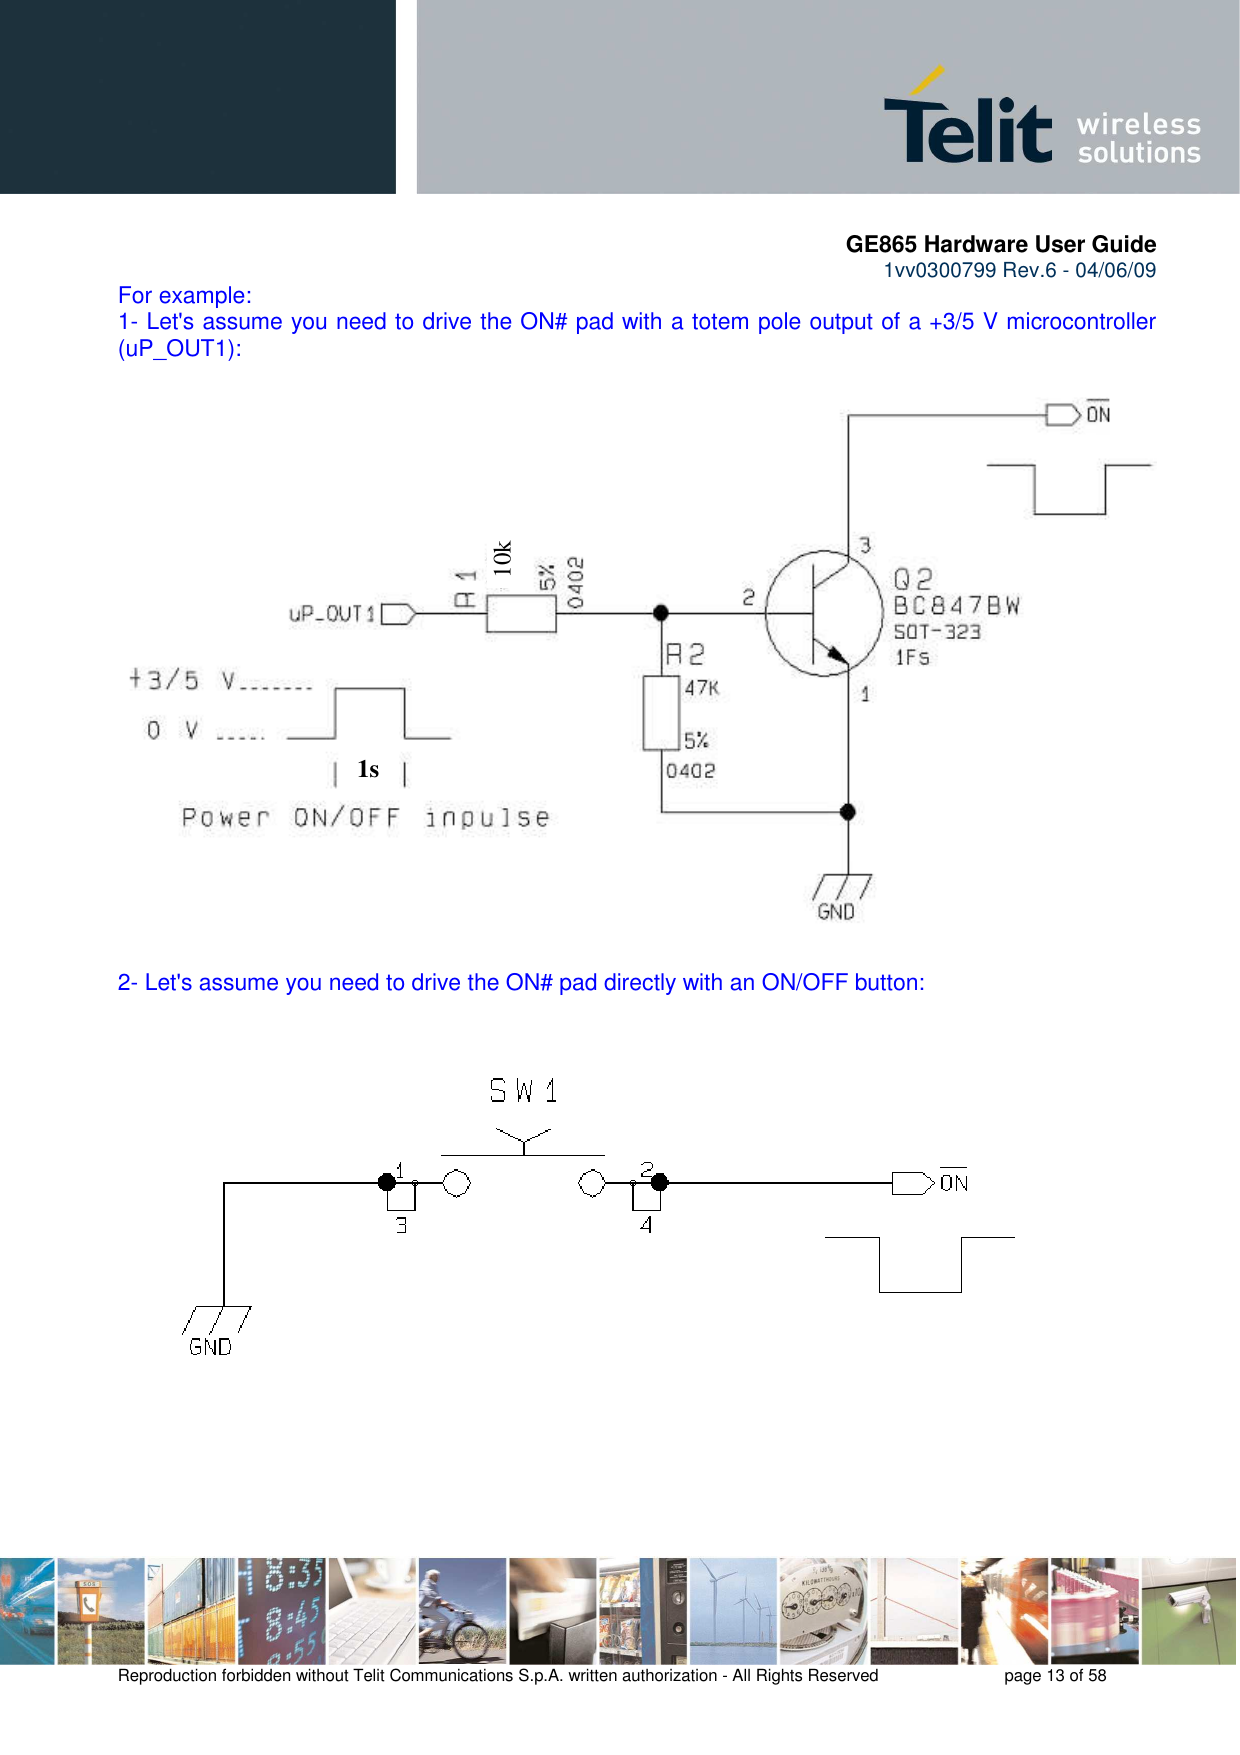       GE865 Hardware User Guide 1vv0300799 Rev.6 - 04/06/09      Reproduction forbidden without Telit Communications S.p.A. written authorization - All Rights Reserved    page 13 of 58  For example: 1- Let&apos;s assume you need to drive the ON# pad with a totem pole output of a +3/5 V microcontroller (uP_OUT1):  2- Let&apos;s assume you need to drive the ON# pad directly with an ON/OFF button:    1s 10k 